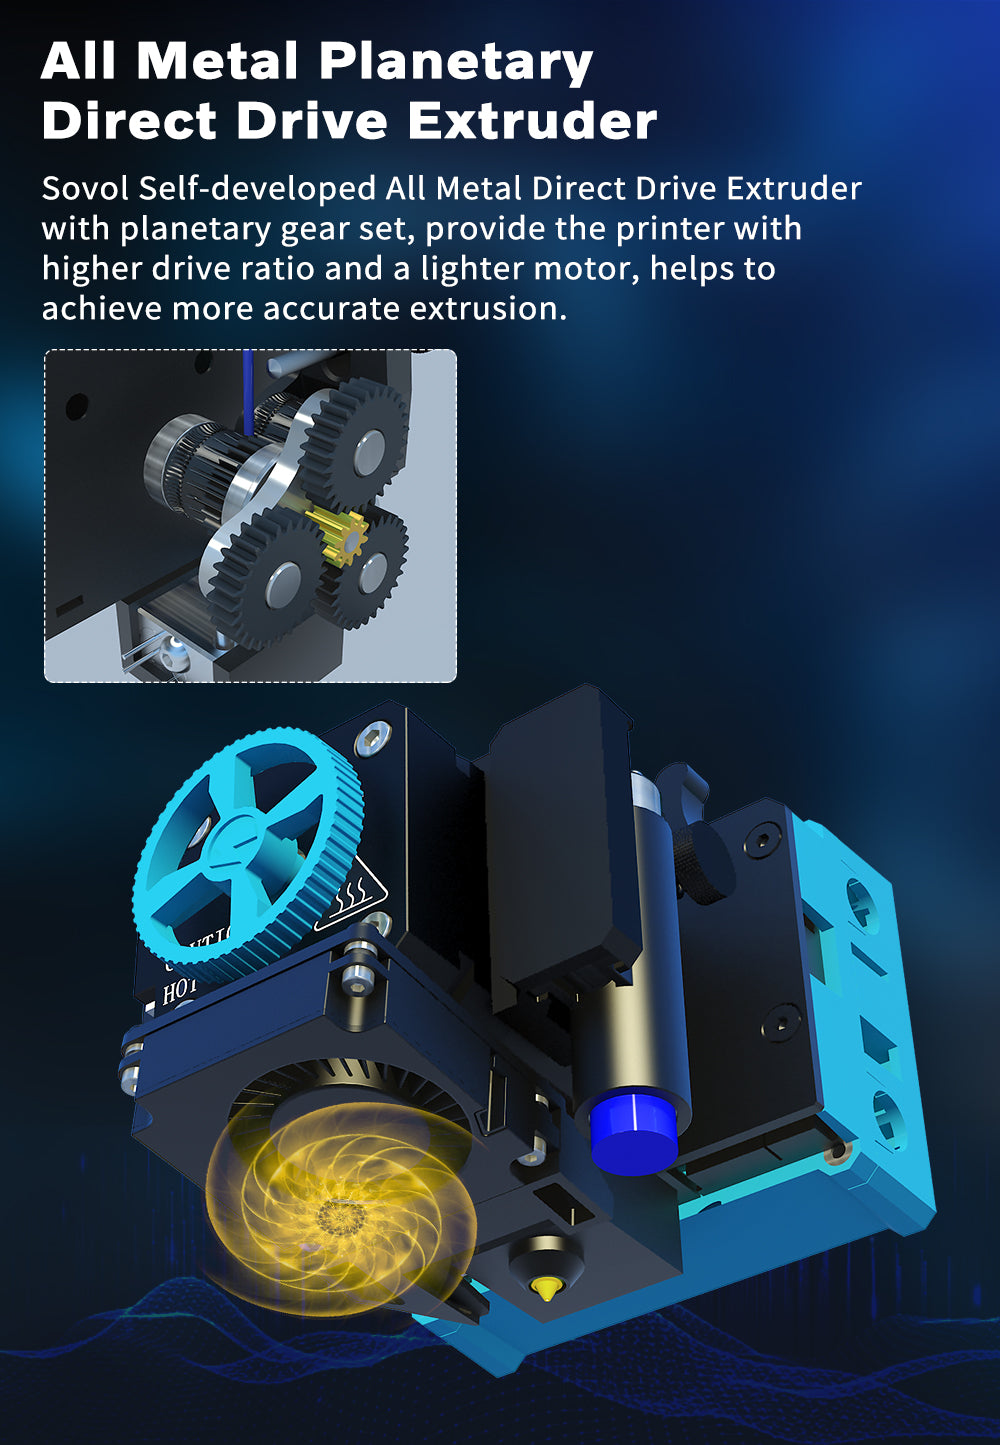 All Metal Planetary Direct Drive Extruder Sovol Self-developed All Metal Direct Drive Extruder with planetary gear set, provide the printer with higher drive ratio and a lighter motor, helps to achieve more accurate extrusion.